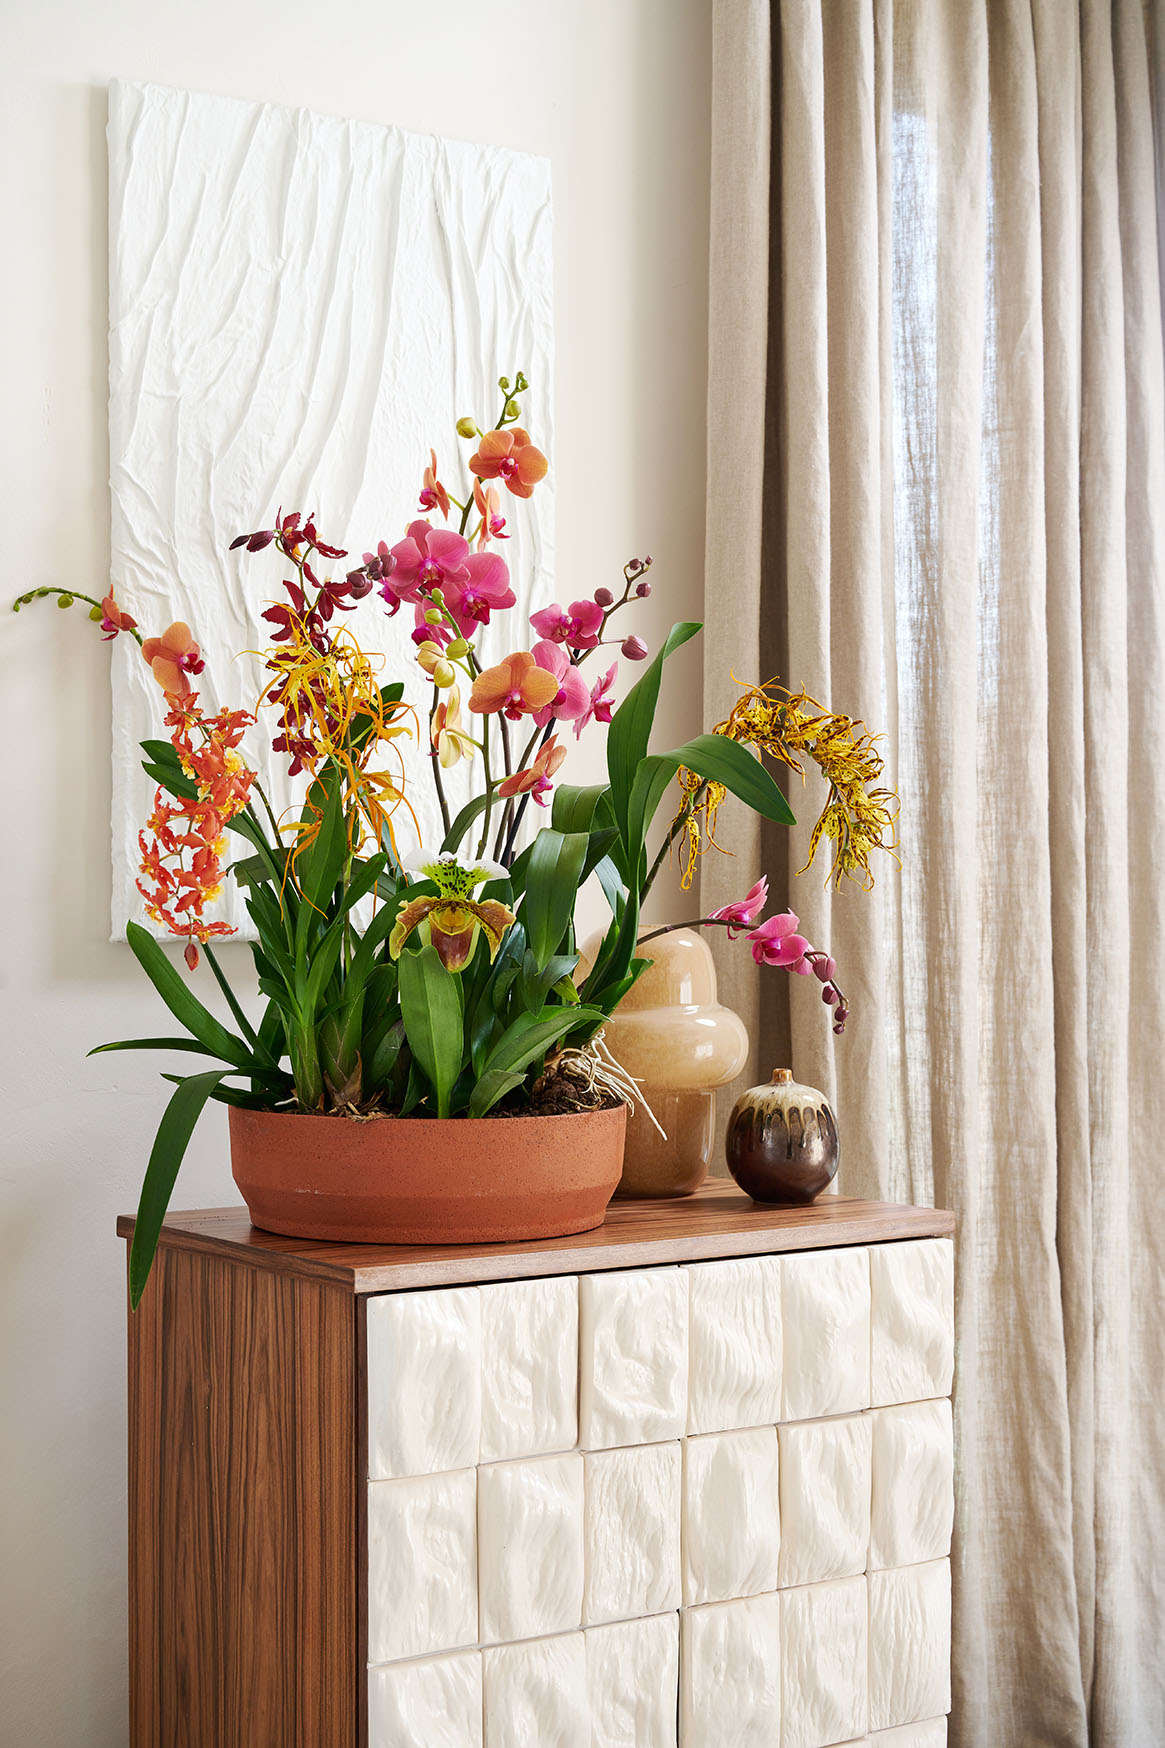 Orchid: beauty that lasts